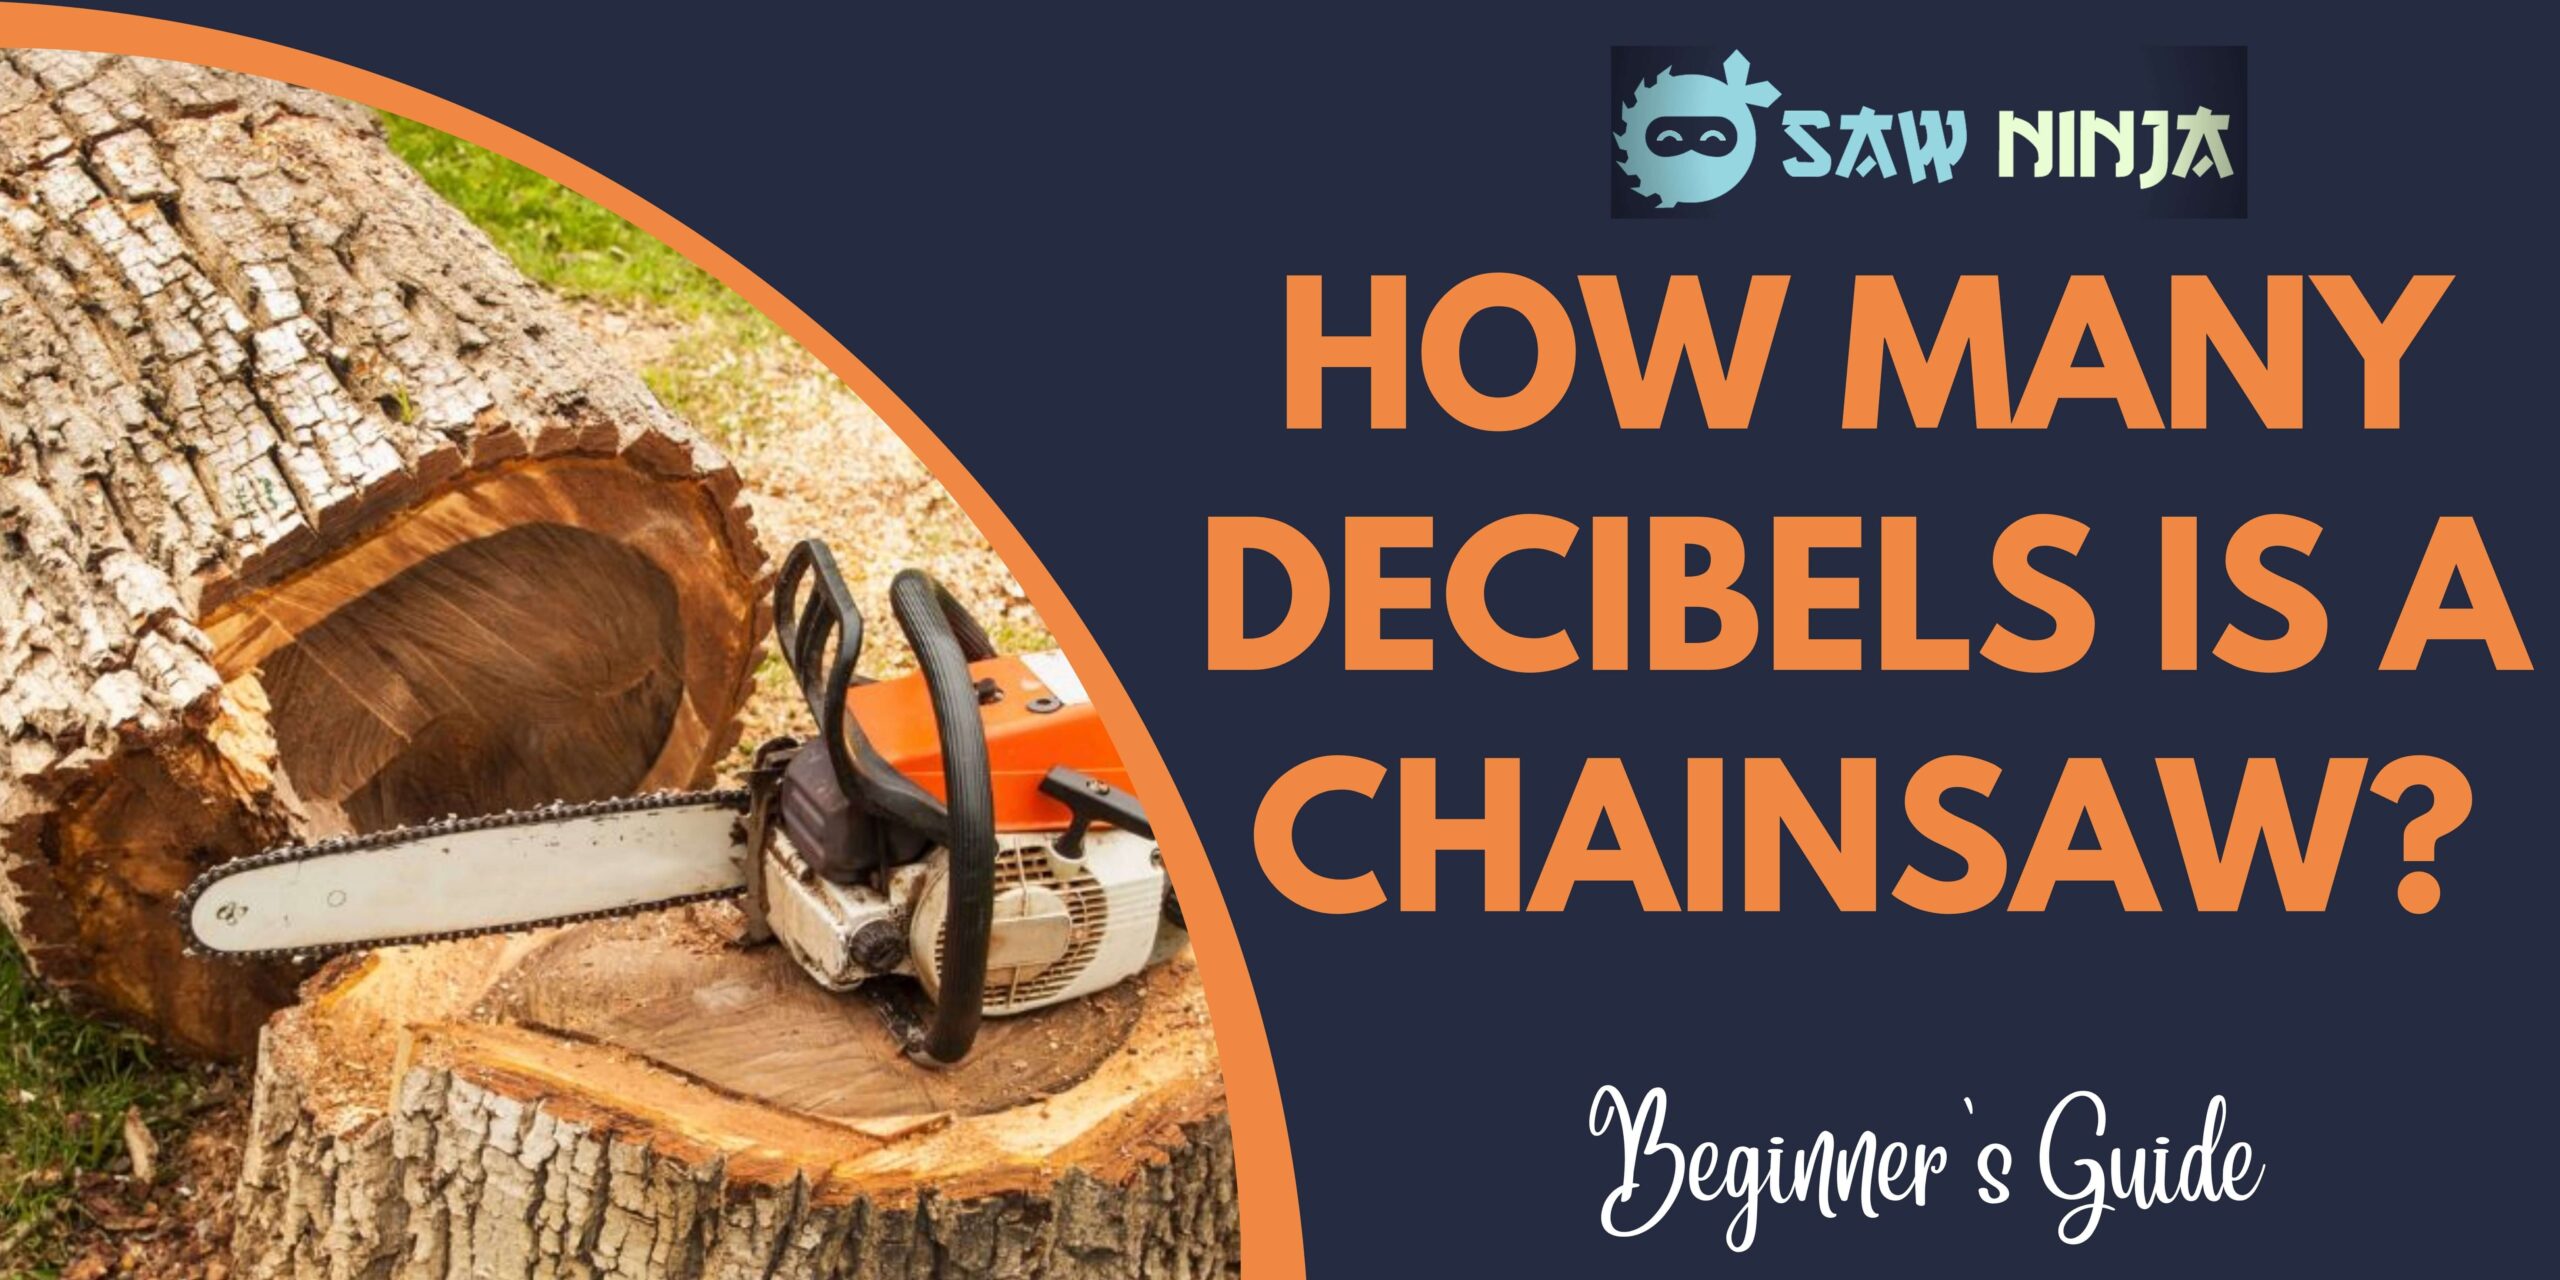 How Many Decibels Is A Chainsaw